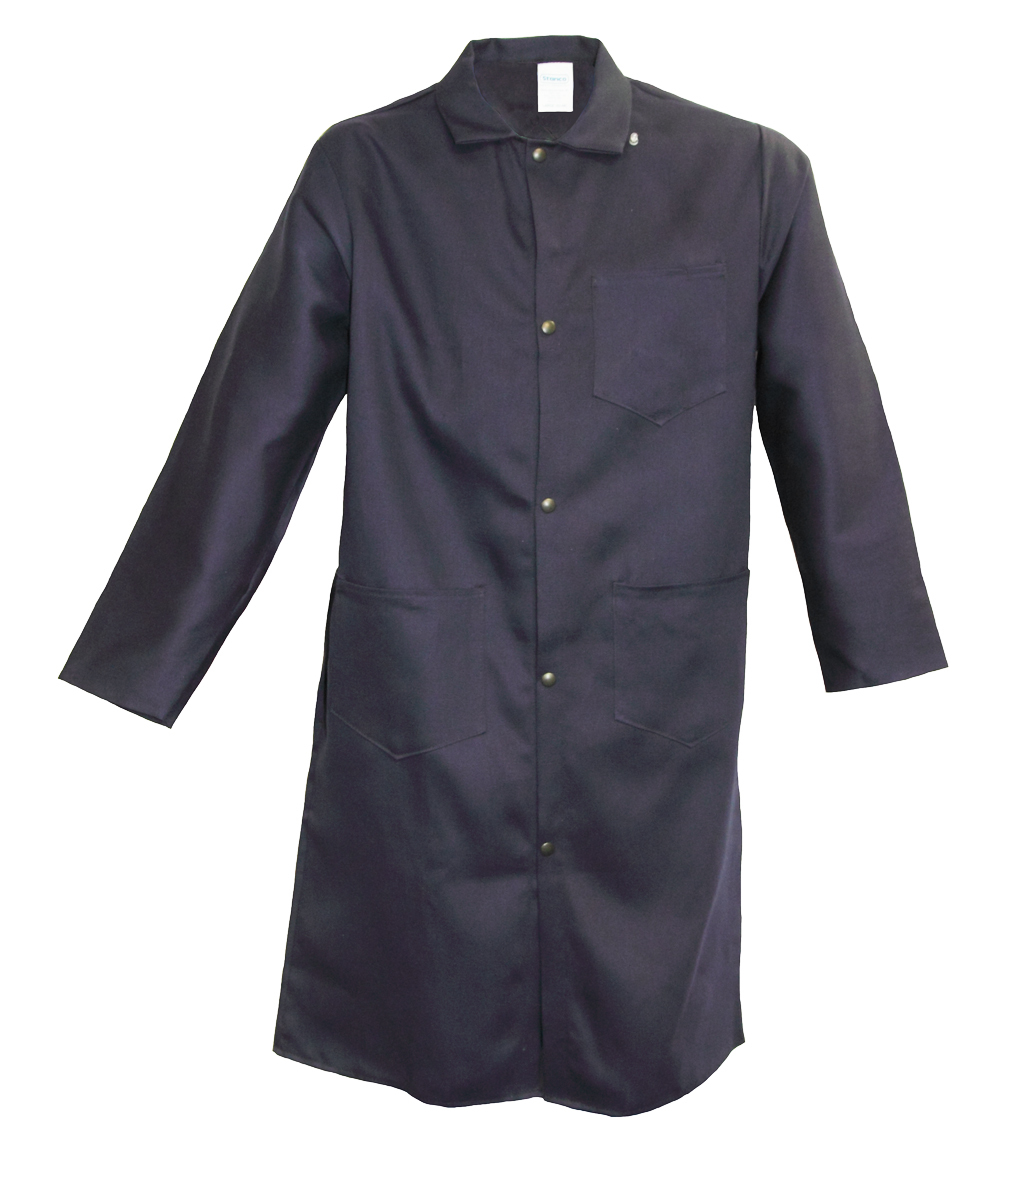 Stanco Safety Products™ 3X Navy Blue Indura® Cotton Flame Resistant Lab Coat